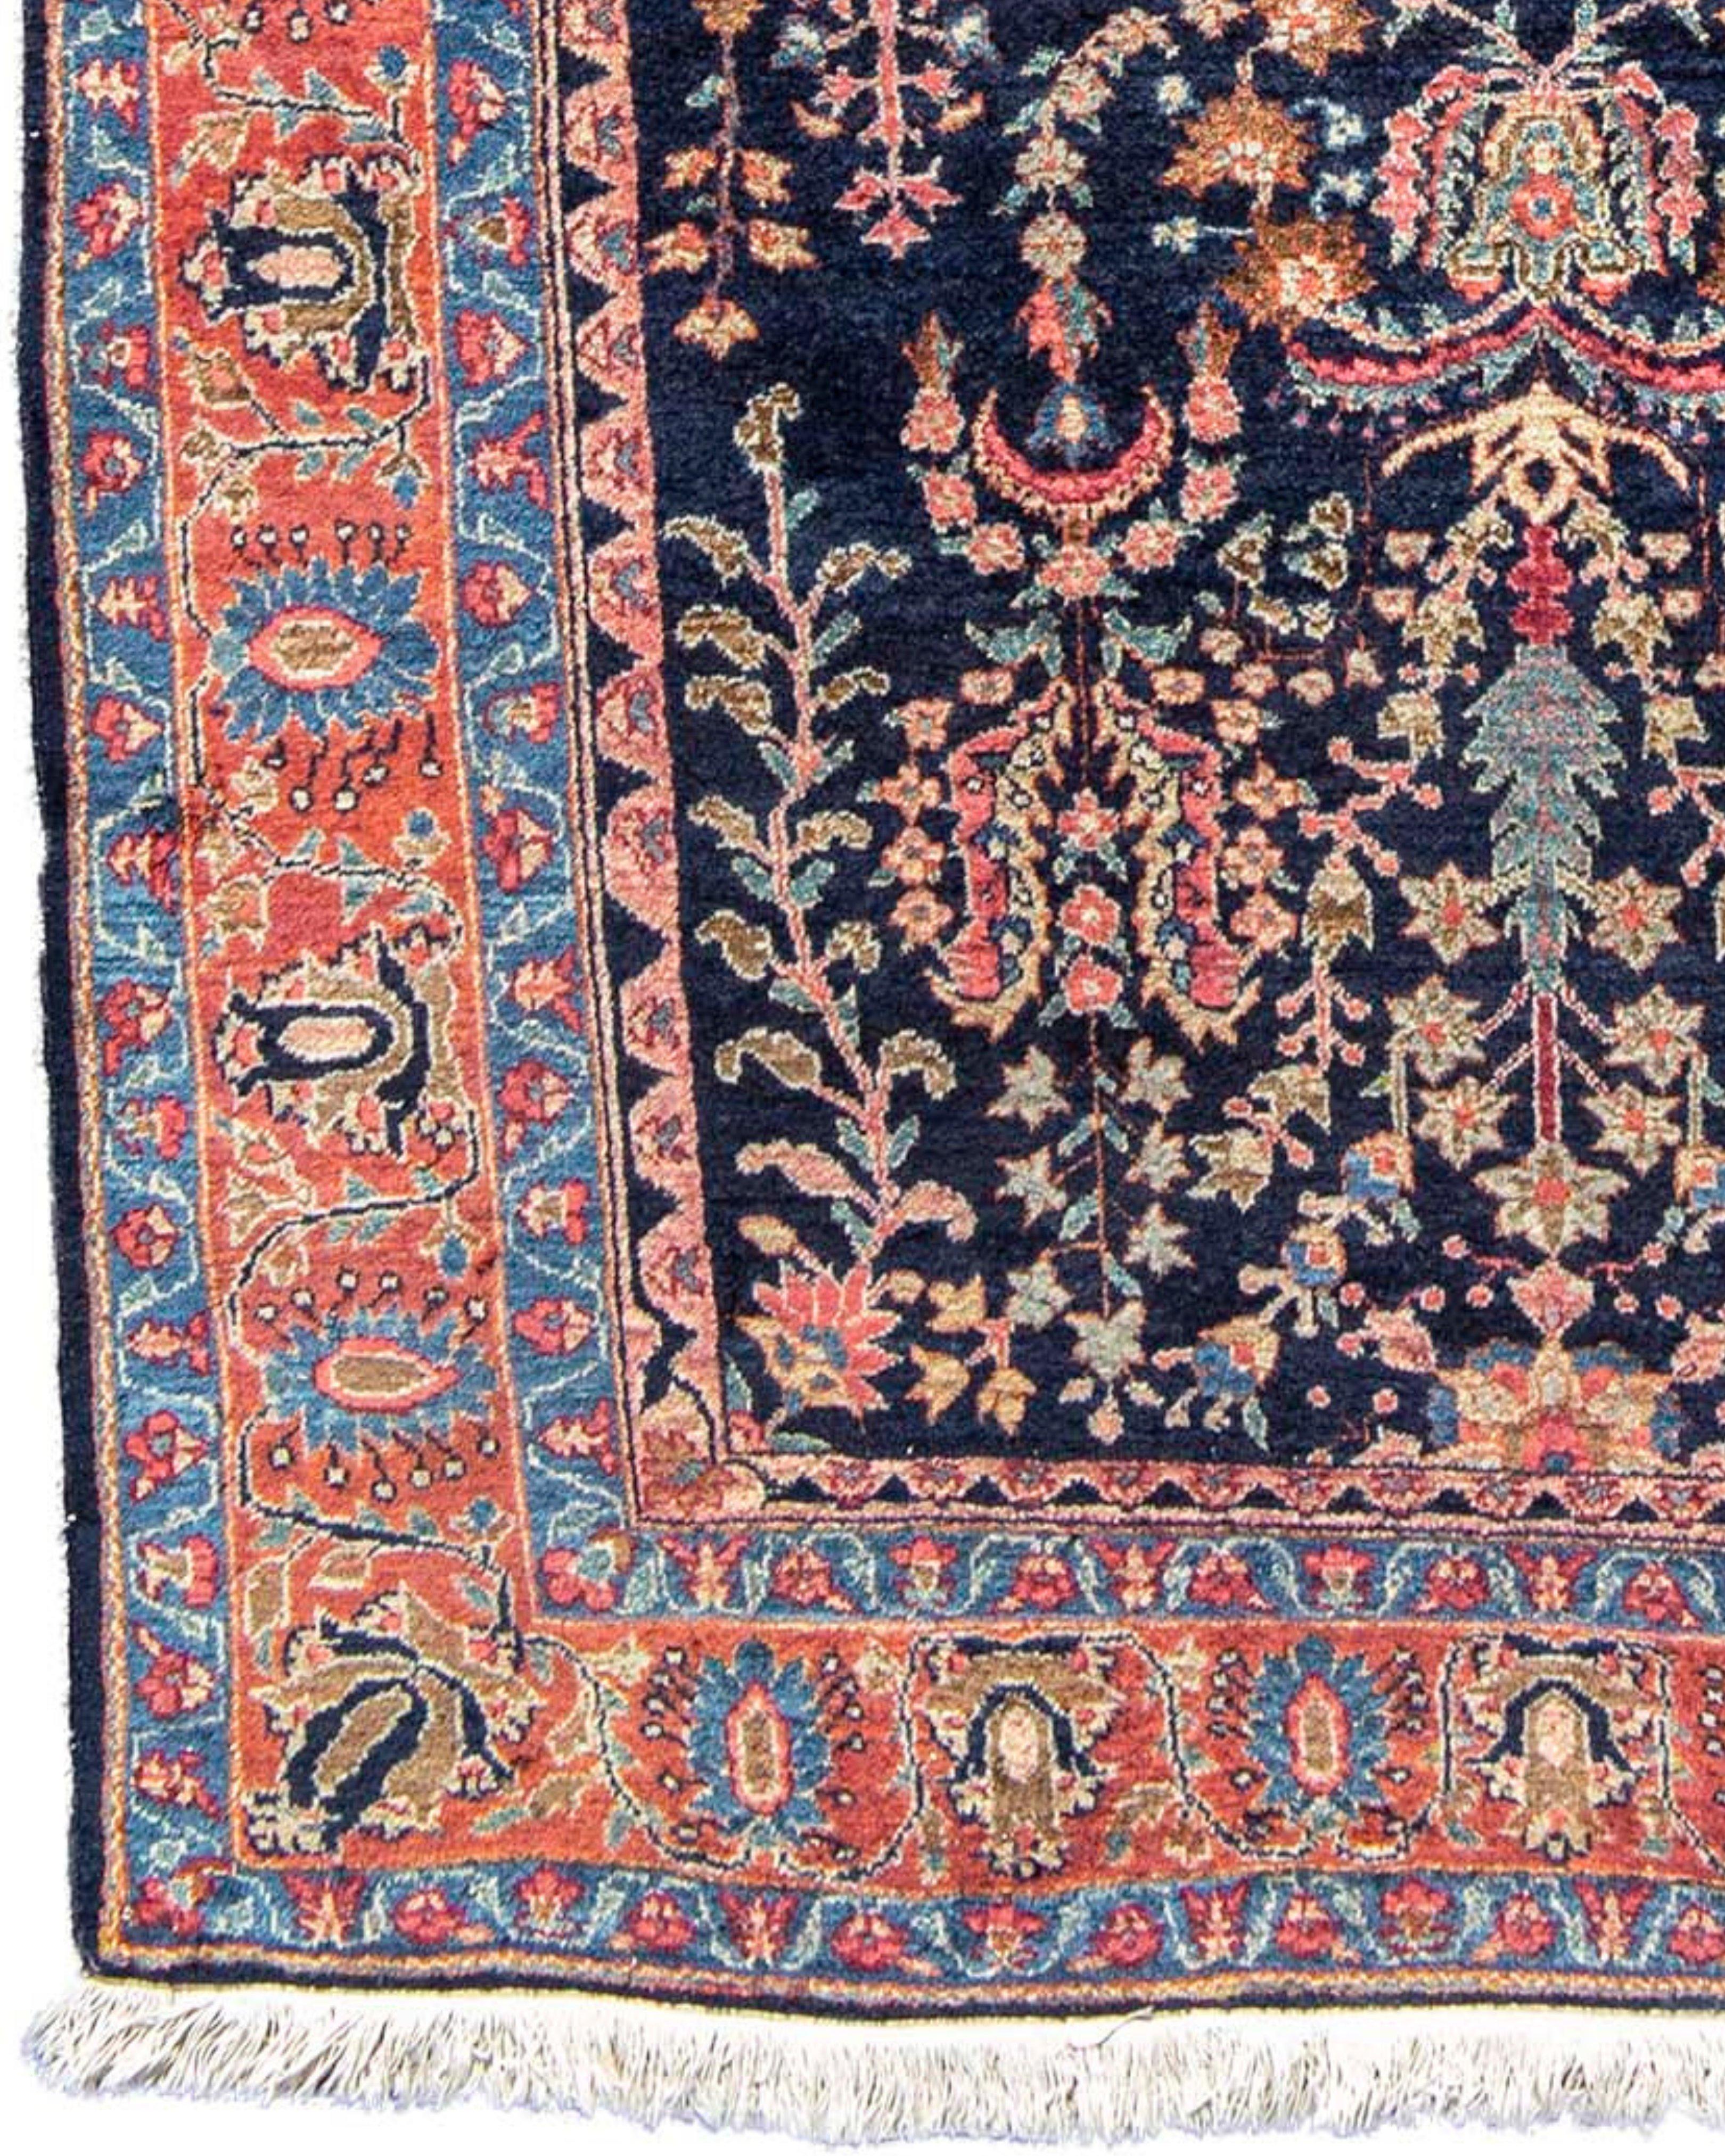 Antique Persian Fereghan Sarouk Rug, c. 1900 In Excellent Condition For Sale In San Francisco, CA